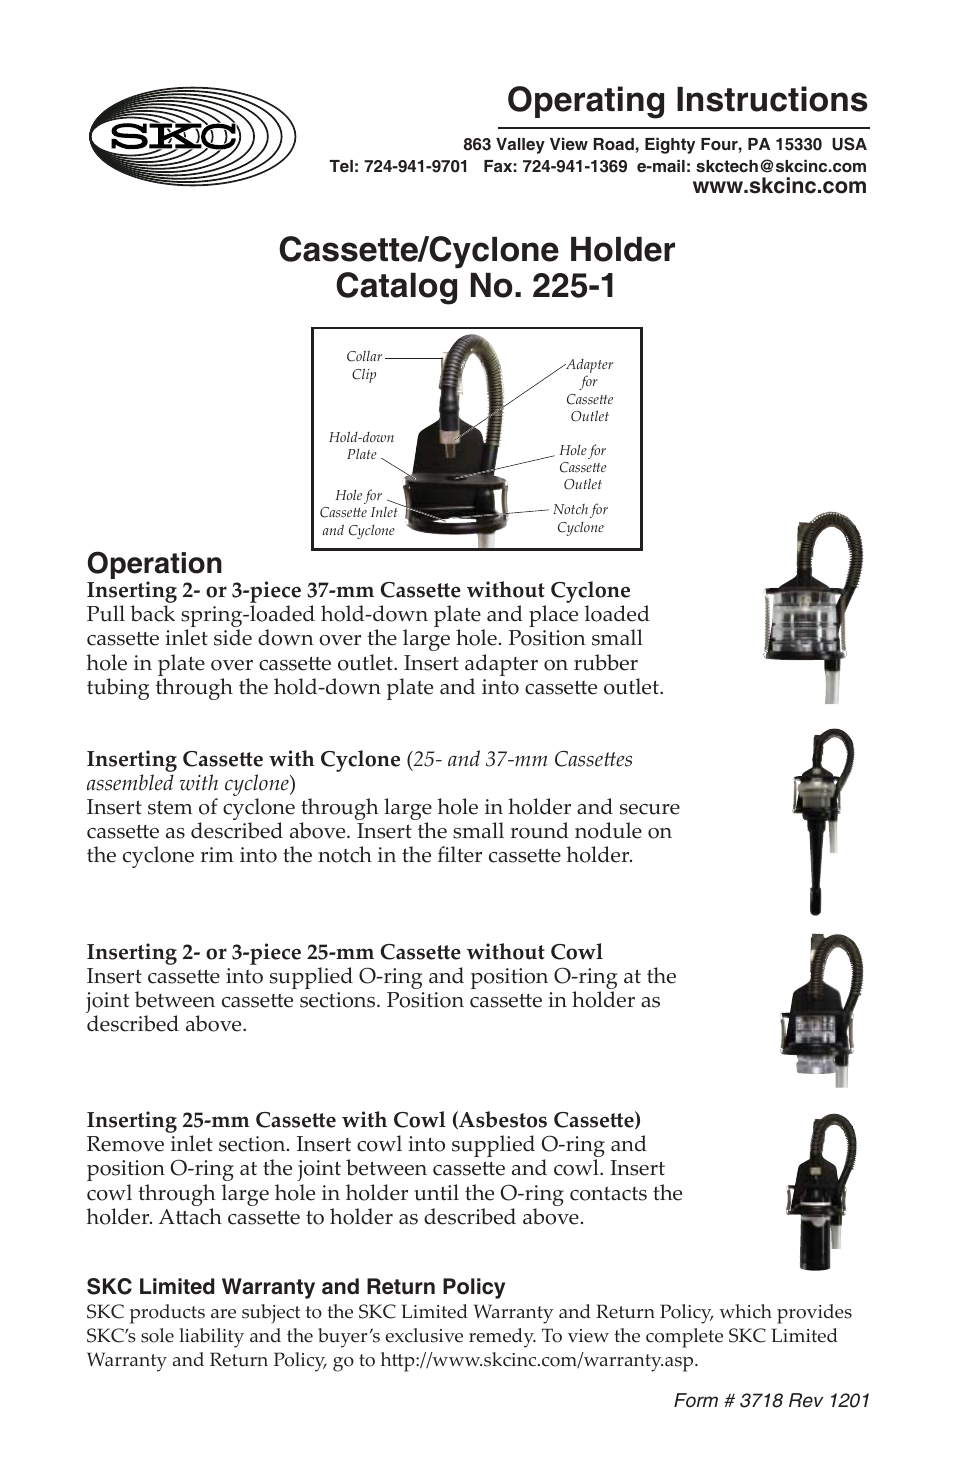 Skc 225 1 Cassette Cyclone Holder User Manual 1 Page